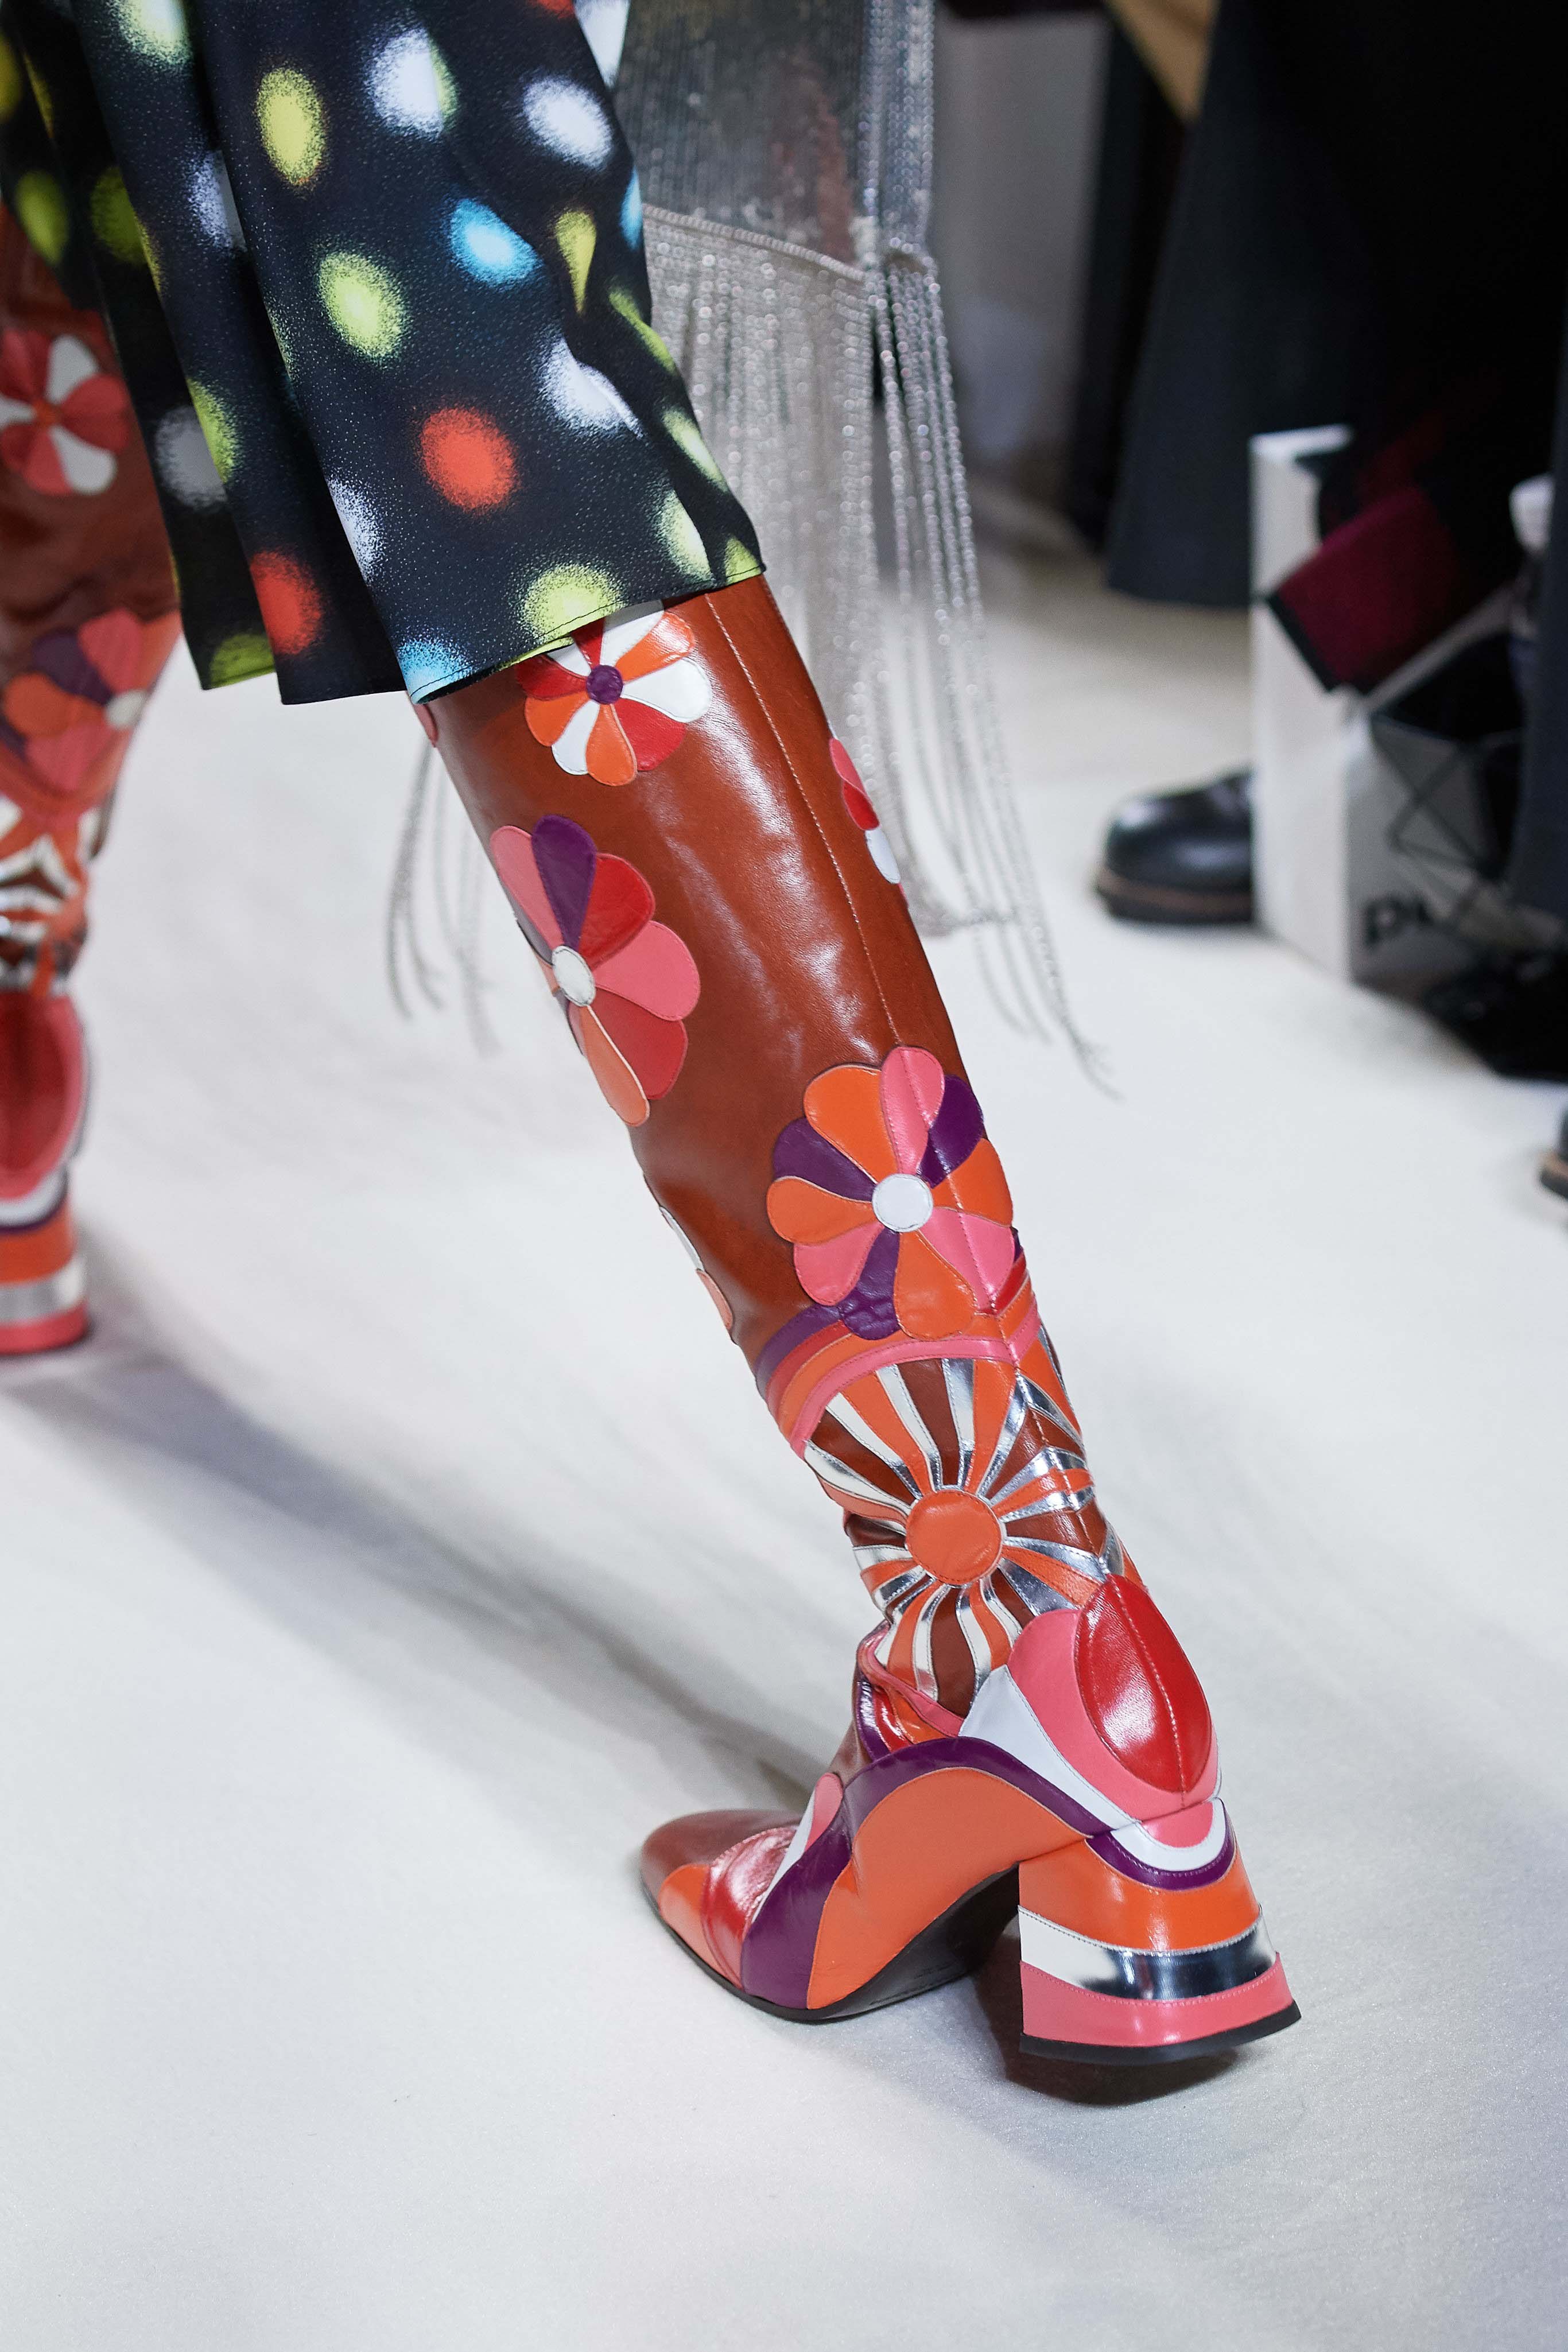 Paco Rabanne Spring Summer 2020 SS2020 trends runway coverage Ready To Wear Vogue details SHOES